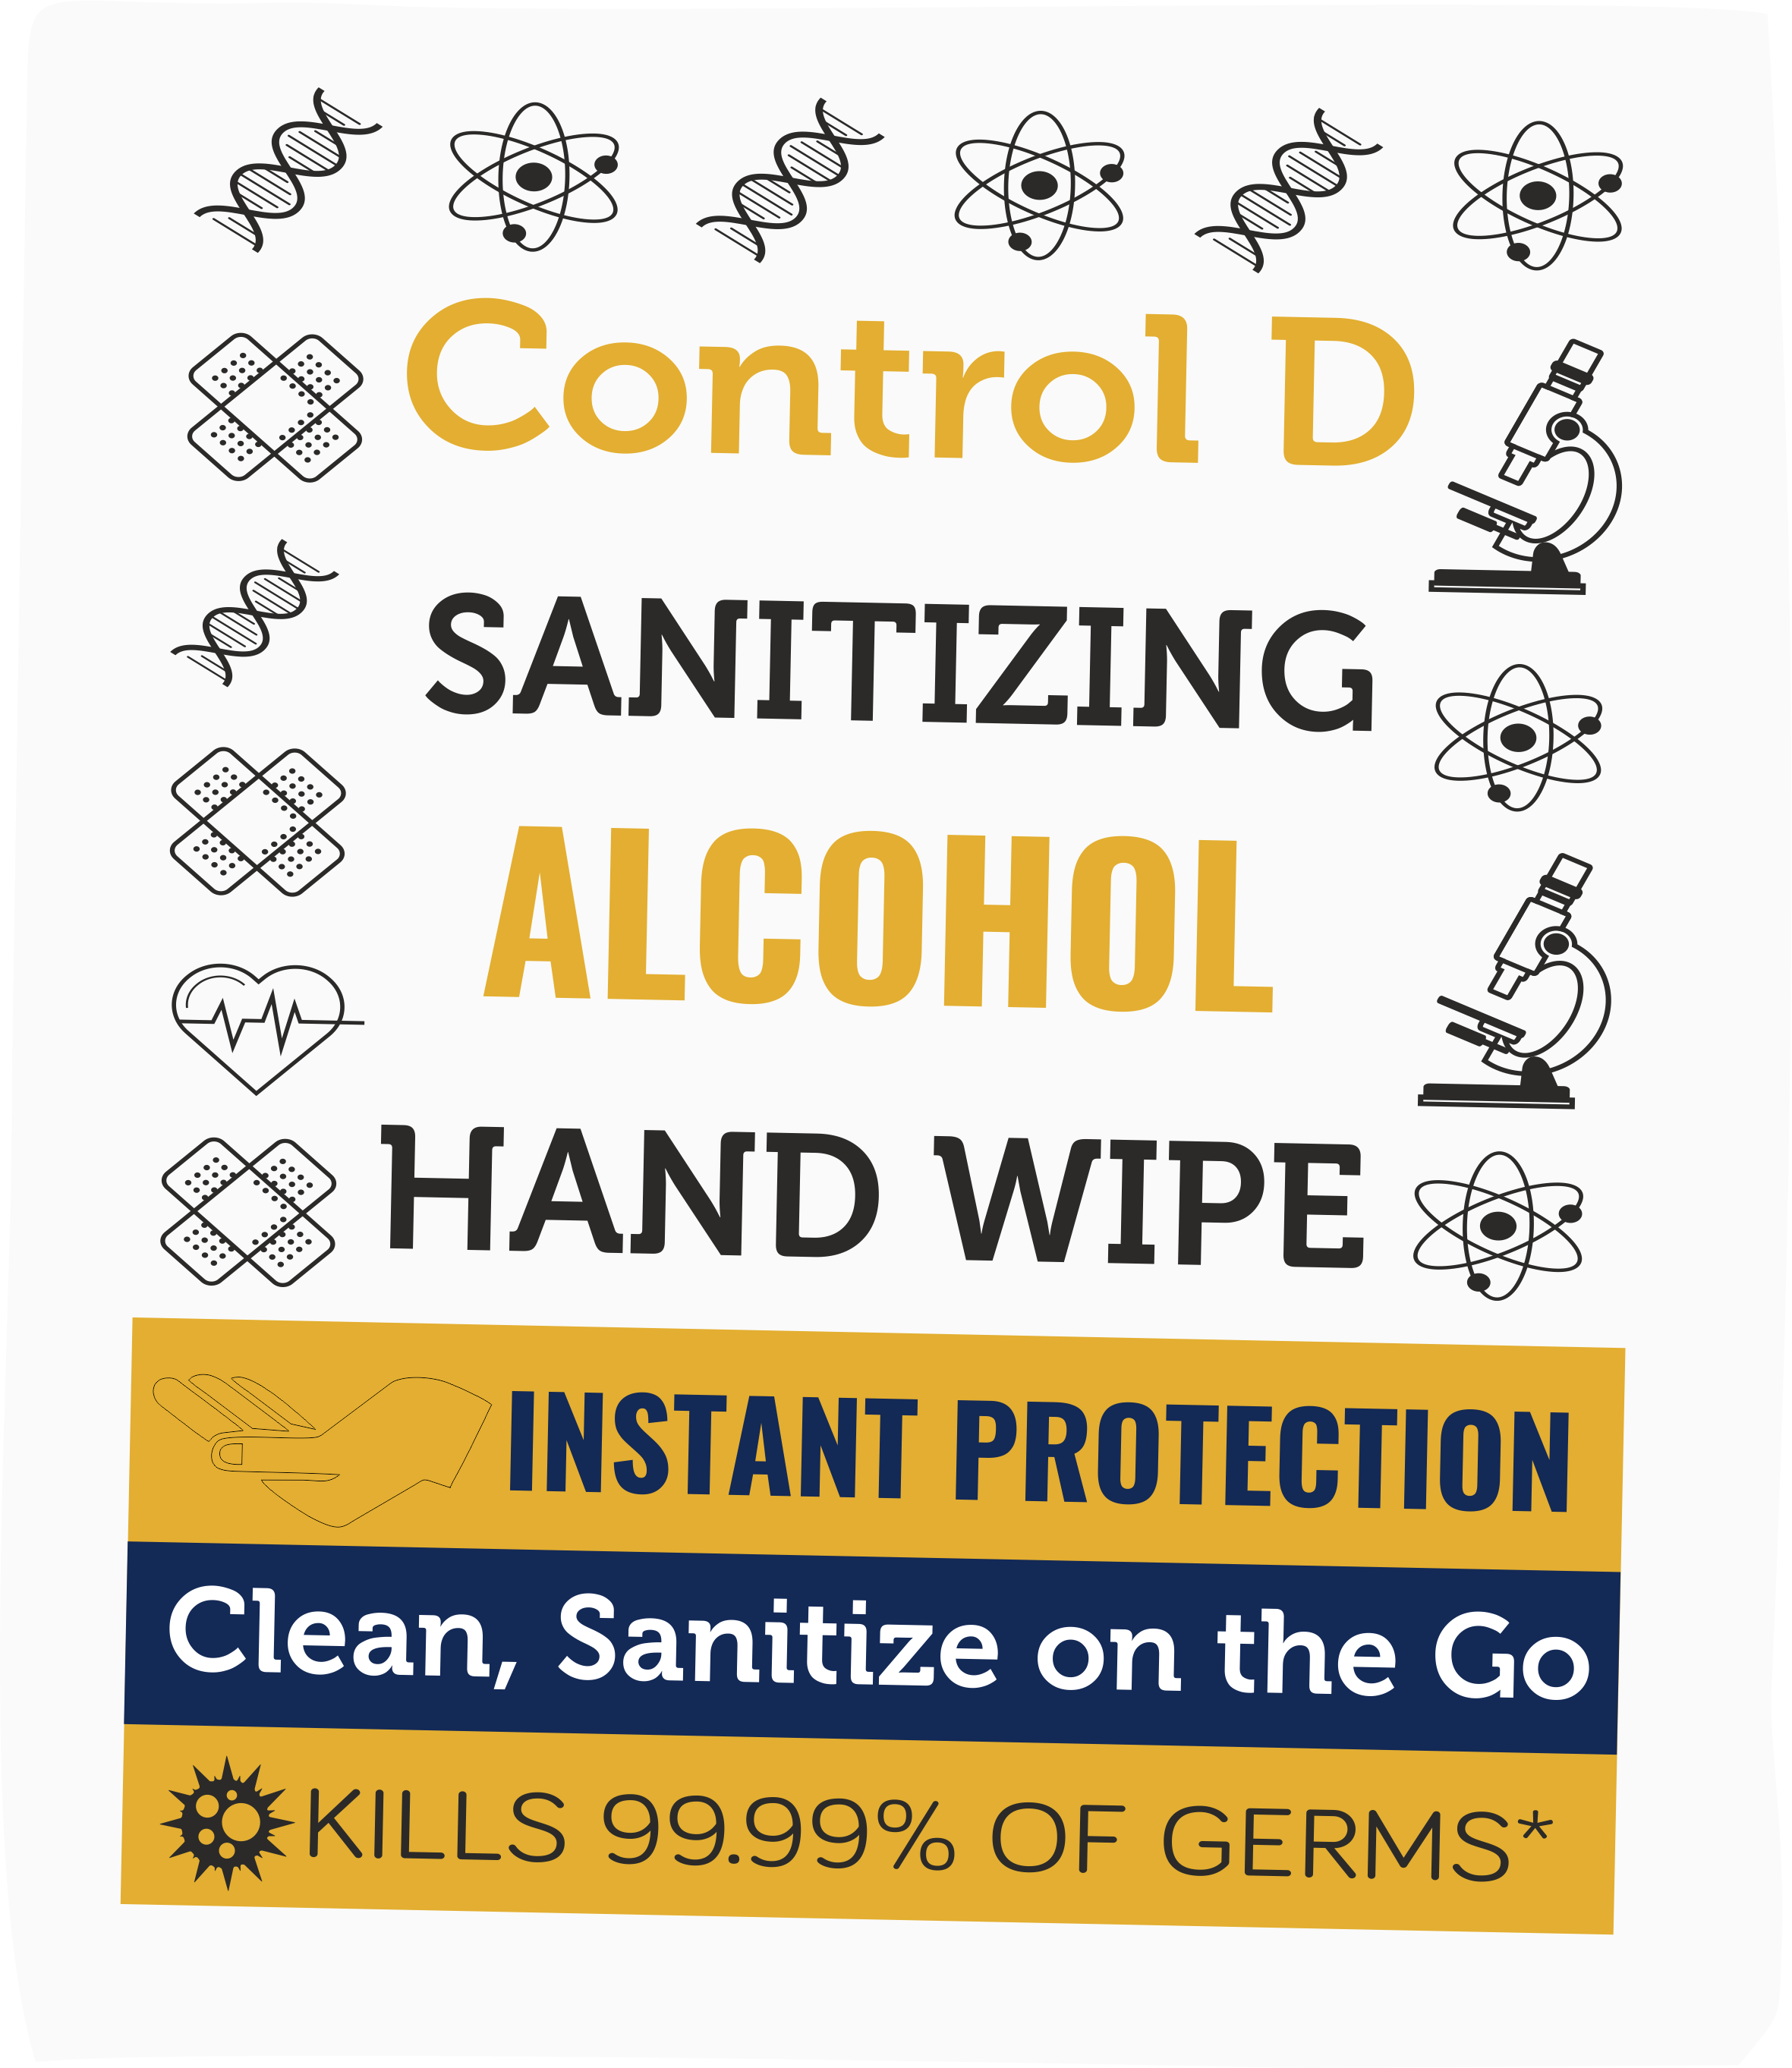 Control D Sanitizing Alcohol Hand Wipes